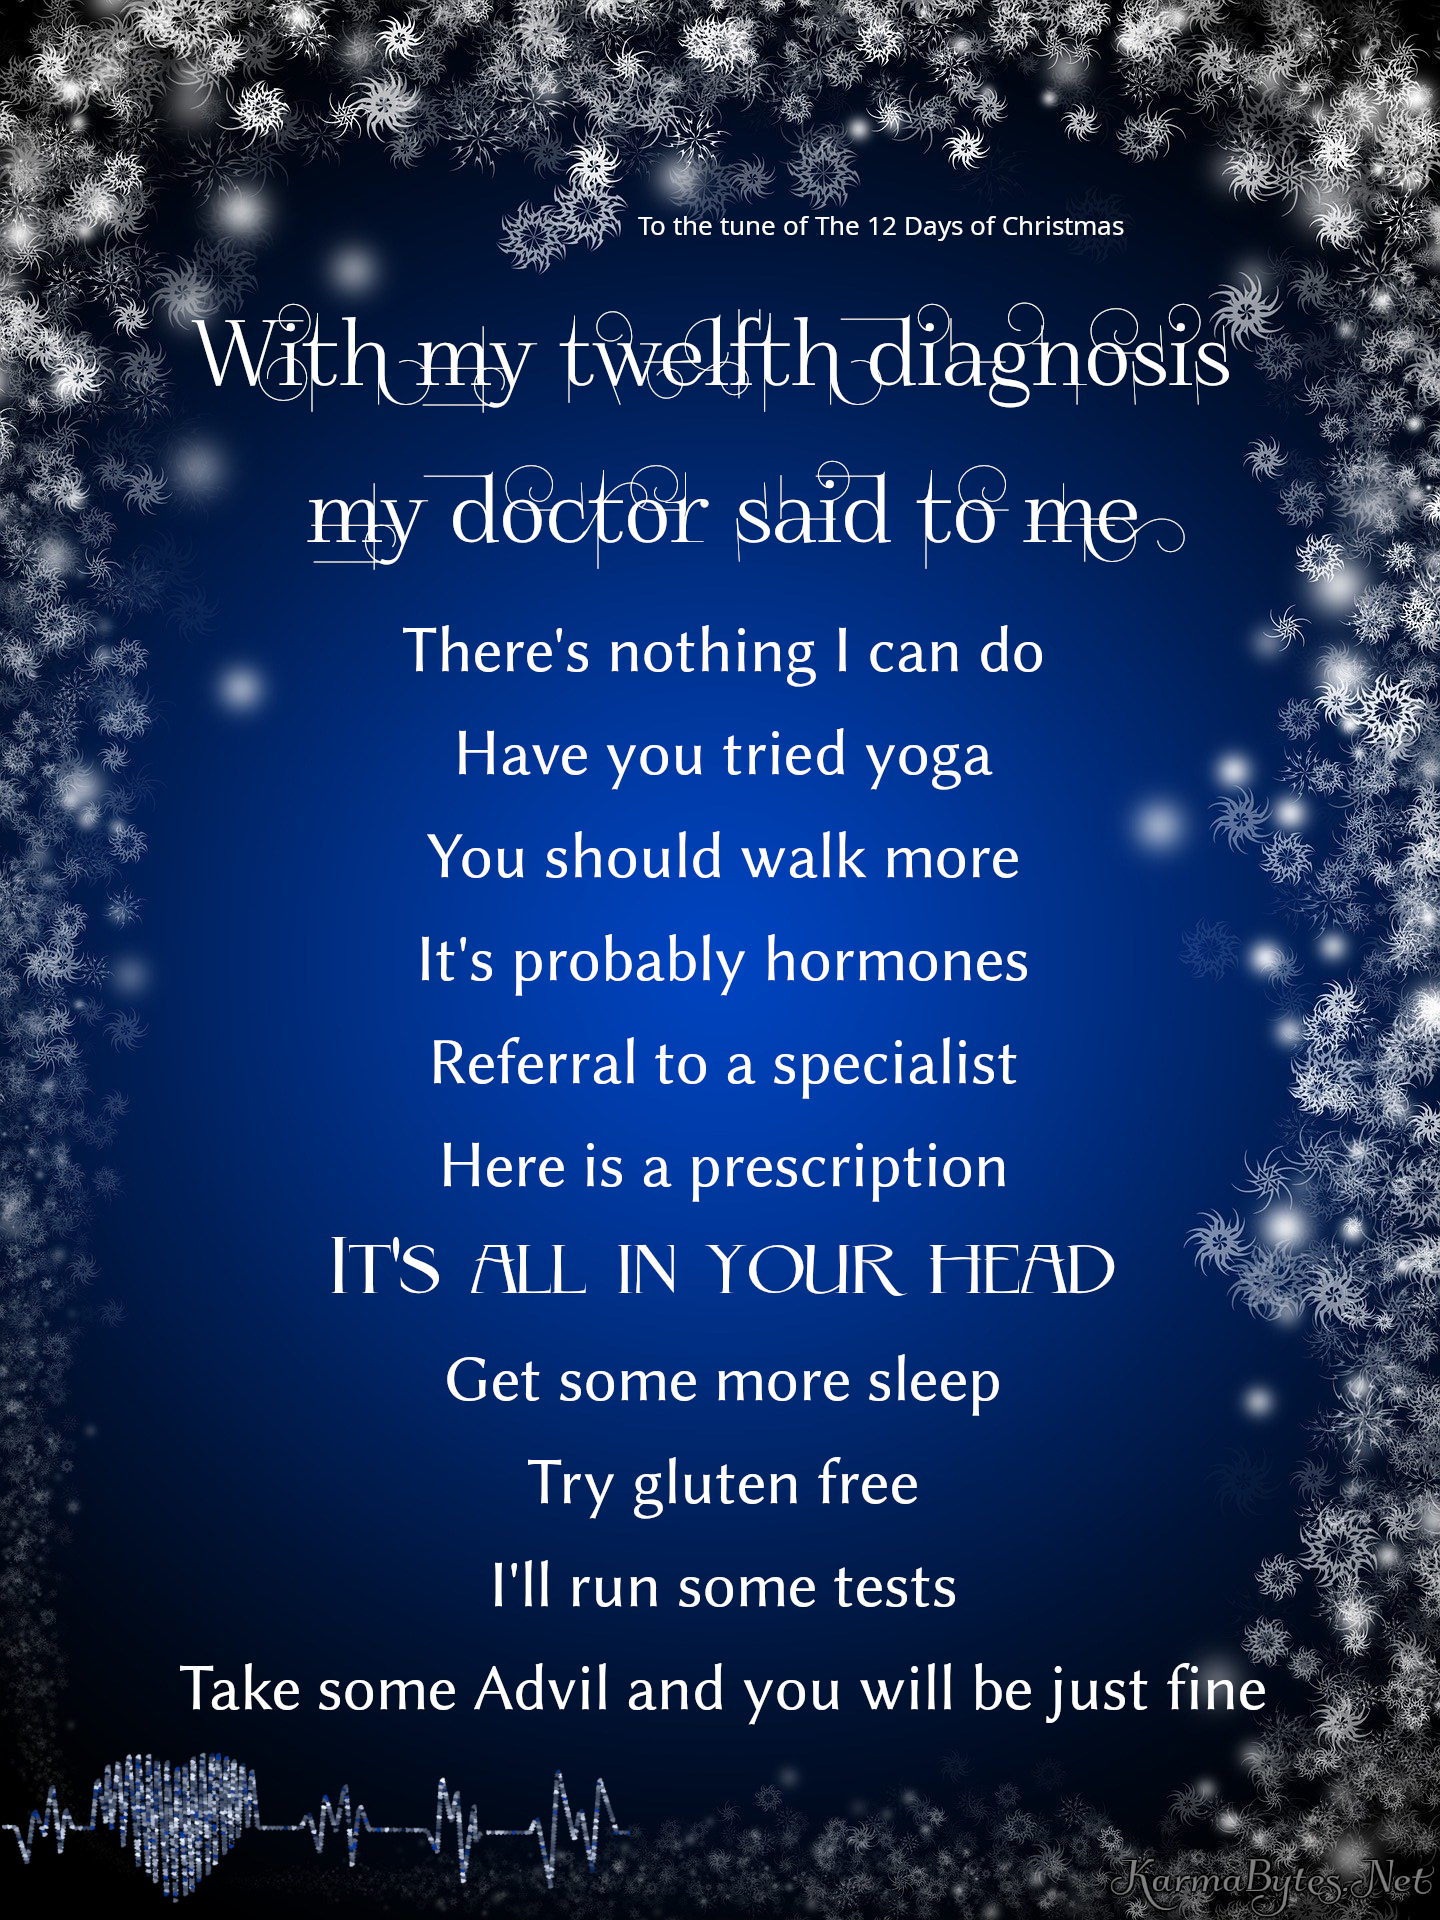 On the 12th Diagnosis ♪♫